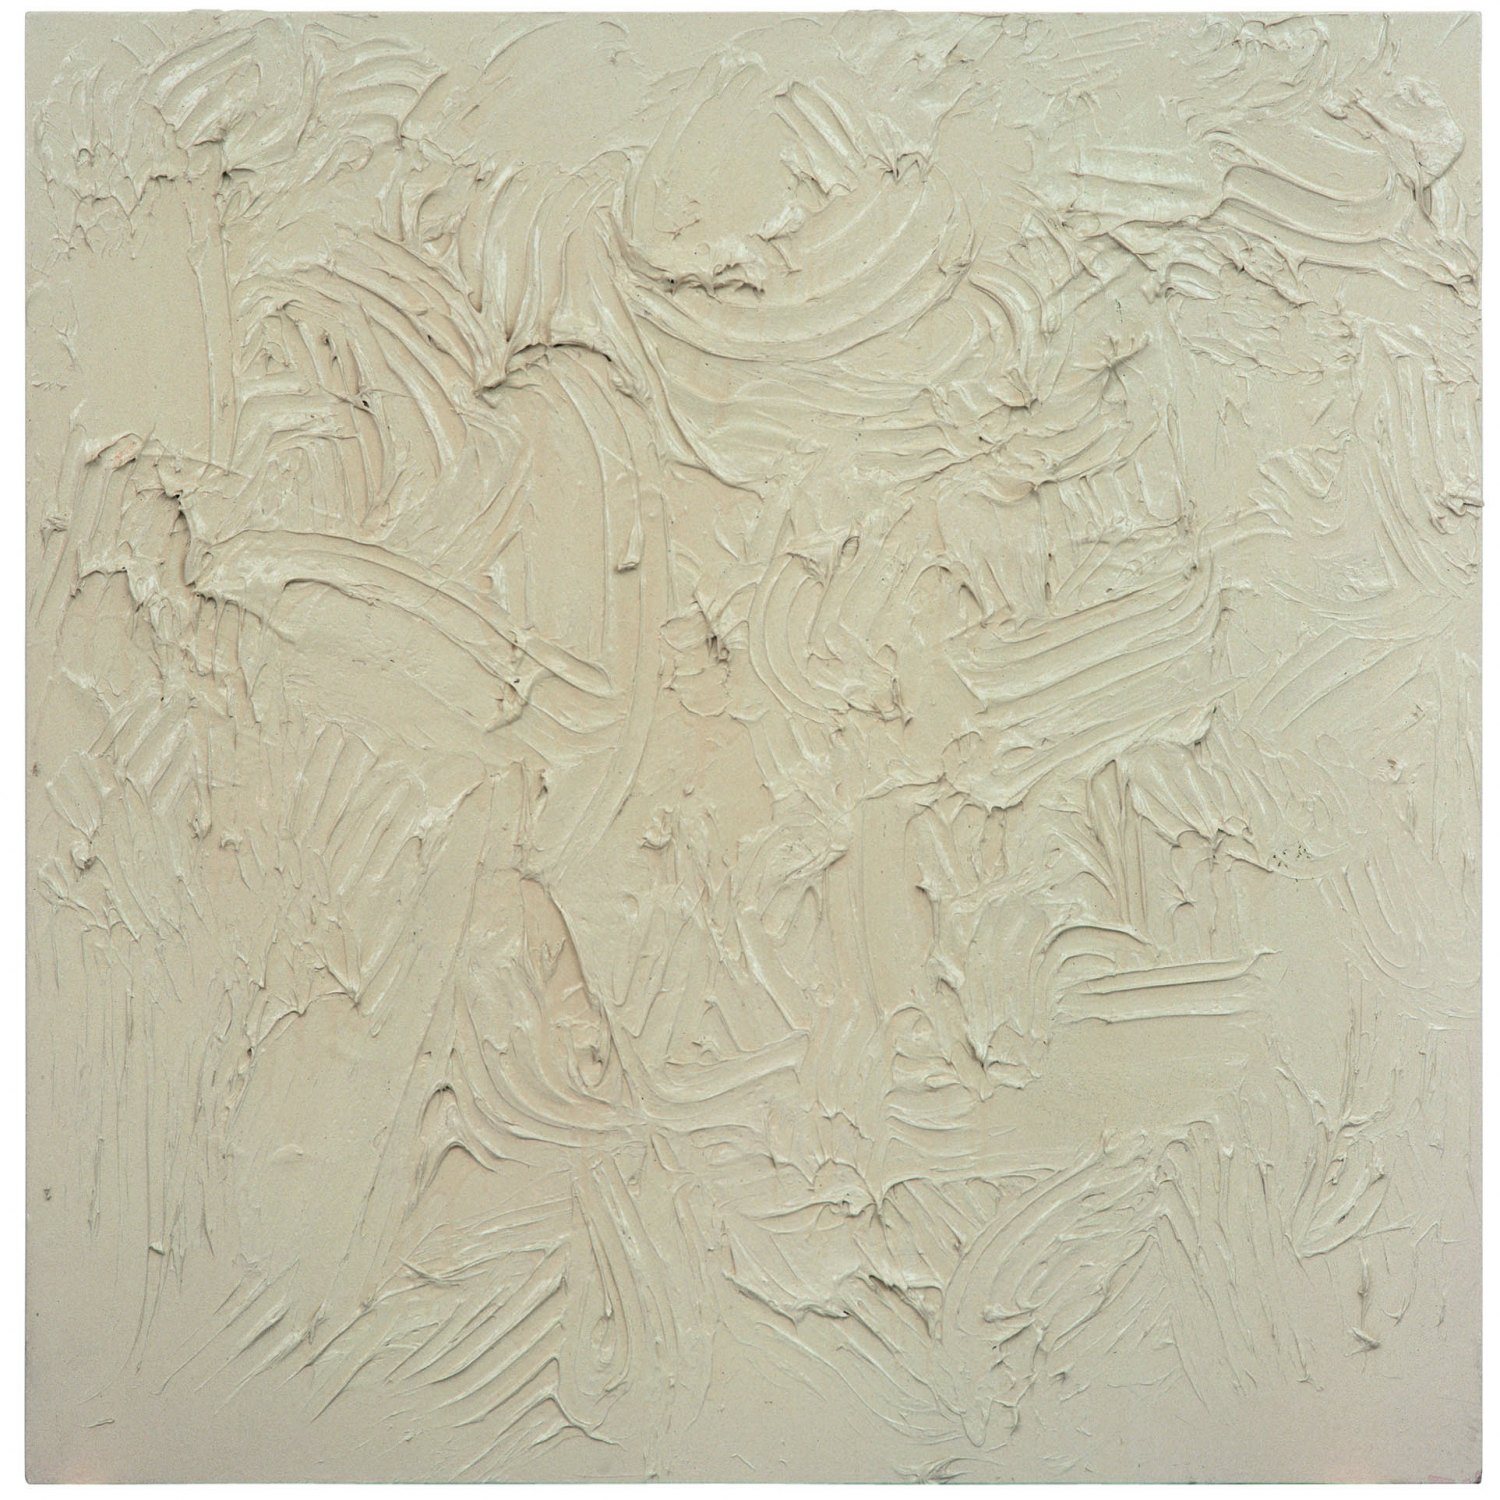 Ull Hohn Tan Enamel, 1993 Lacquer and modeling paste on canvas, 152 × 152 cm